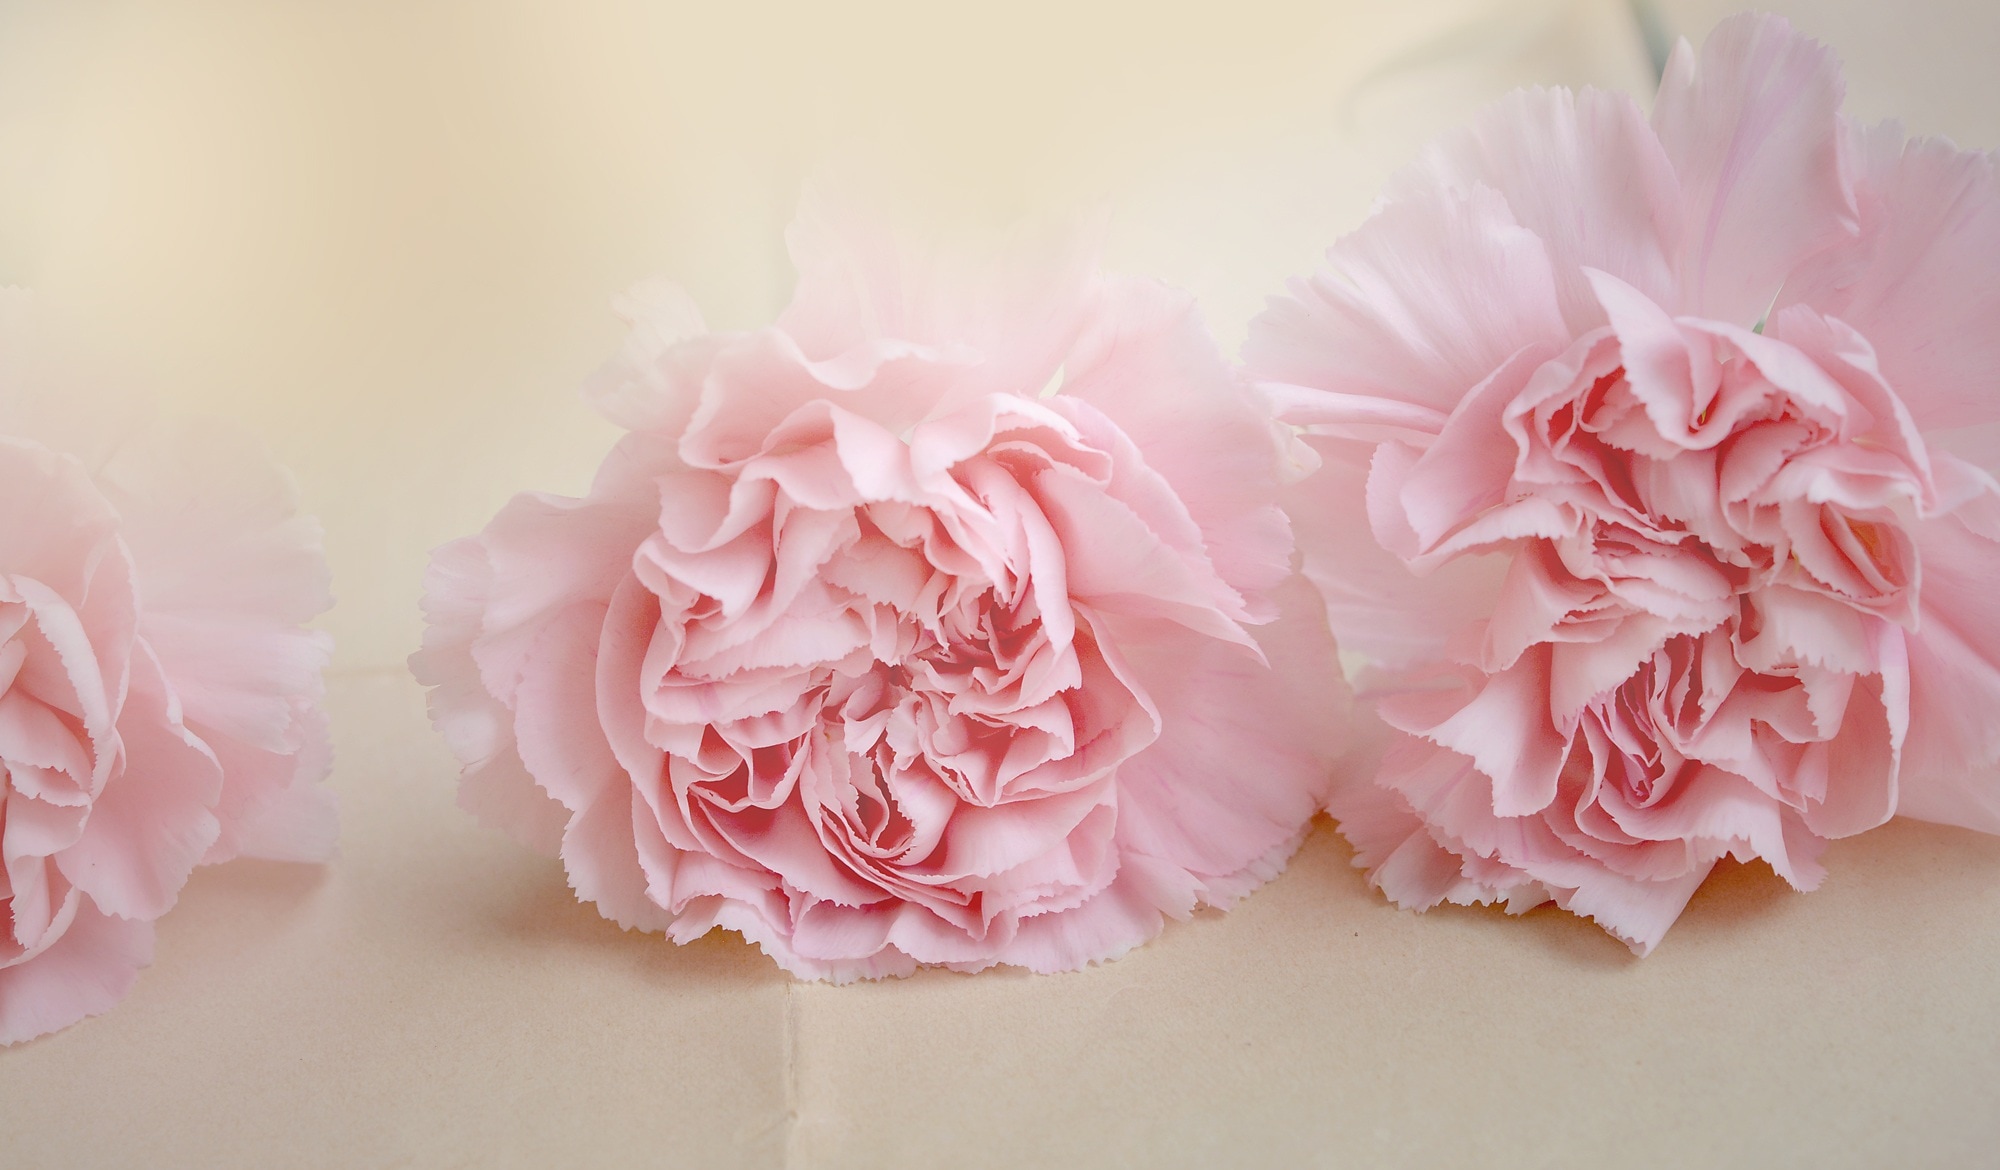 two pink petaled flowers